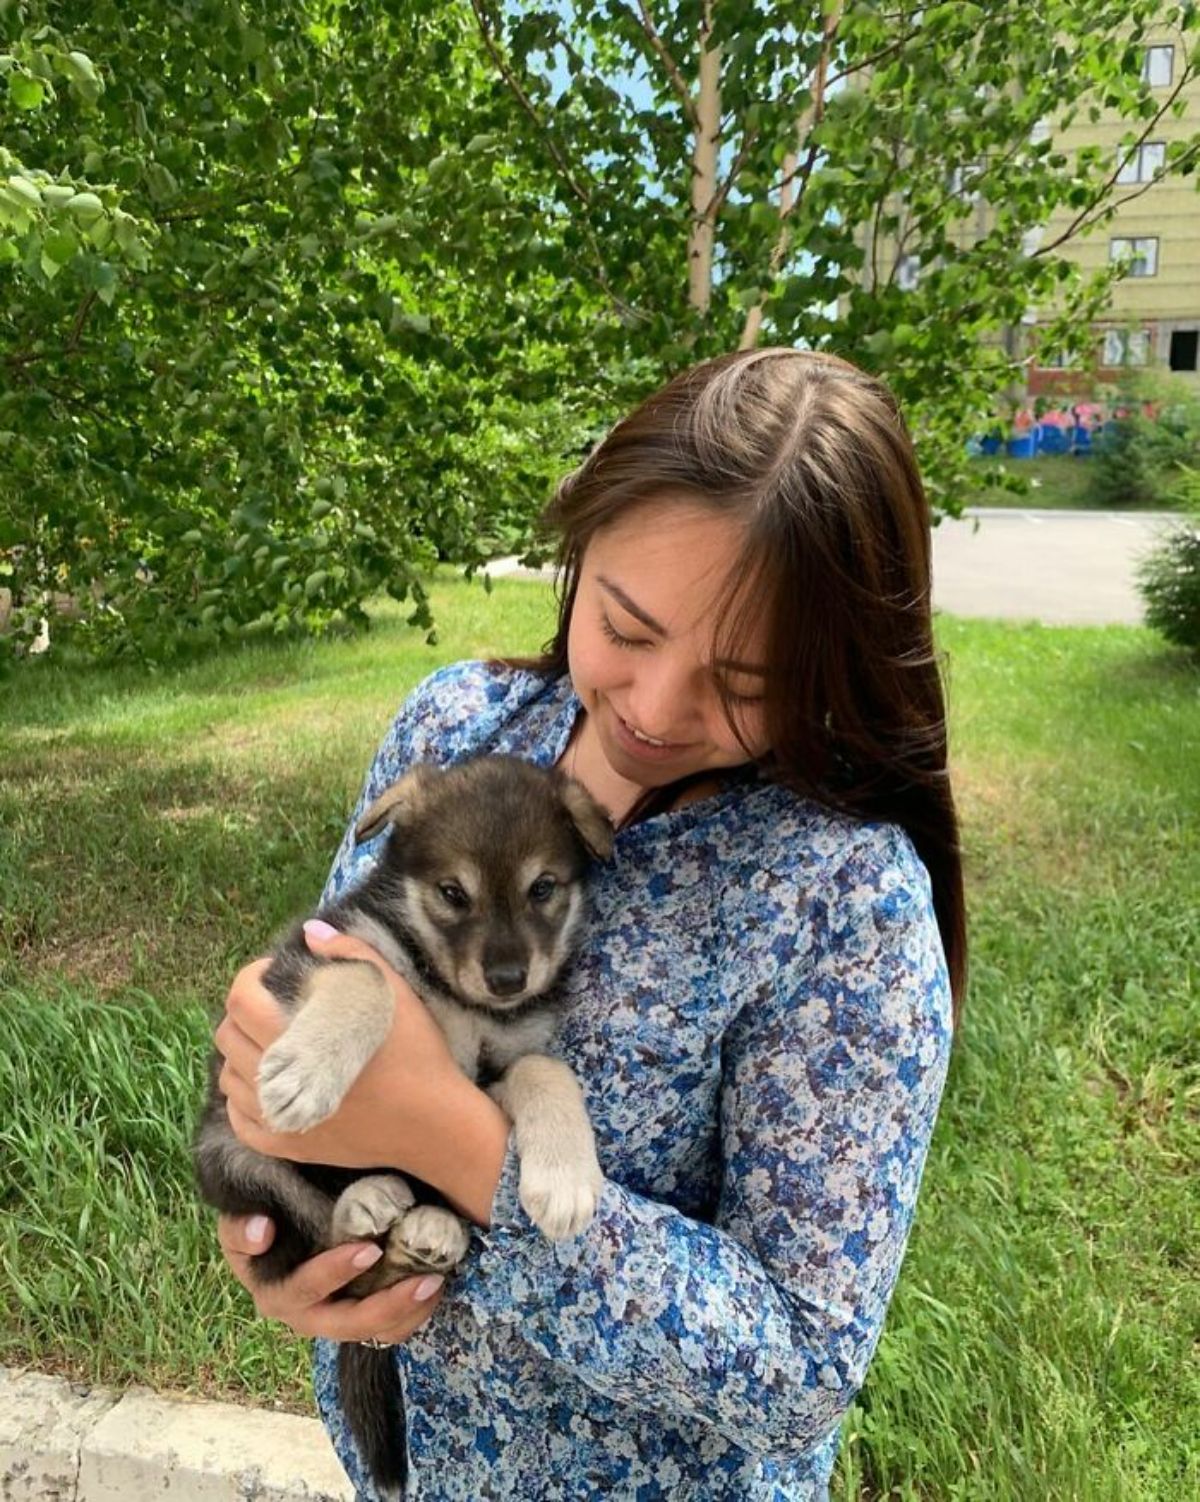 wolf cub being held by a woman wearing blue in a garden